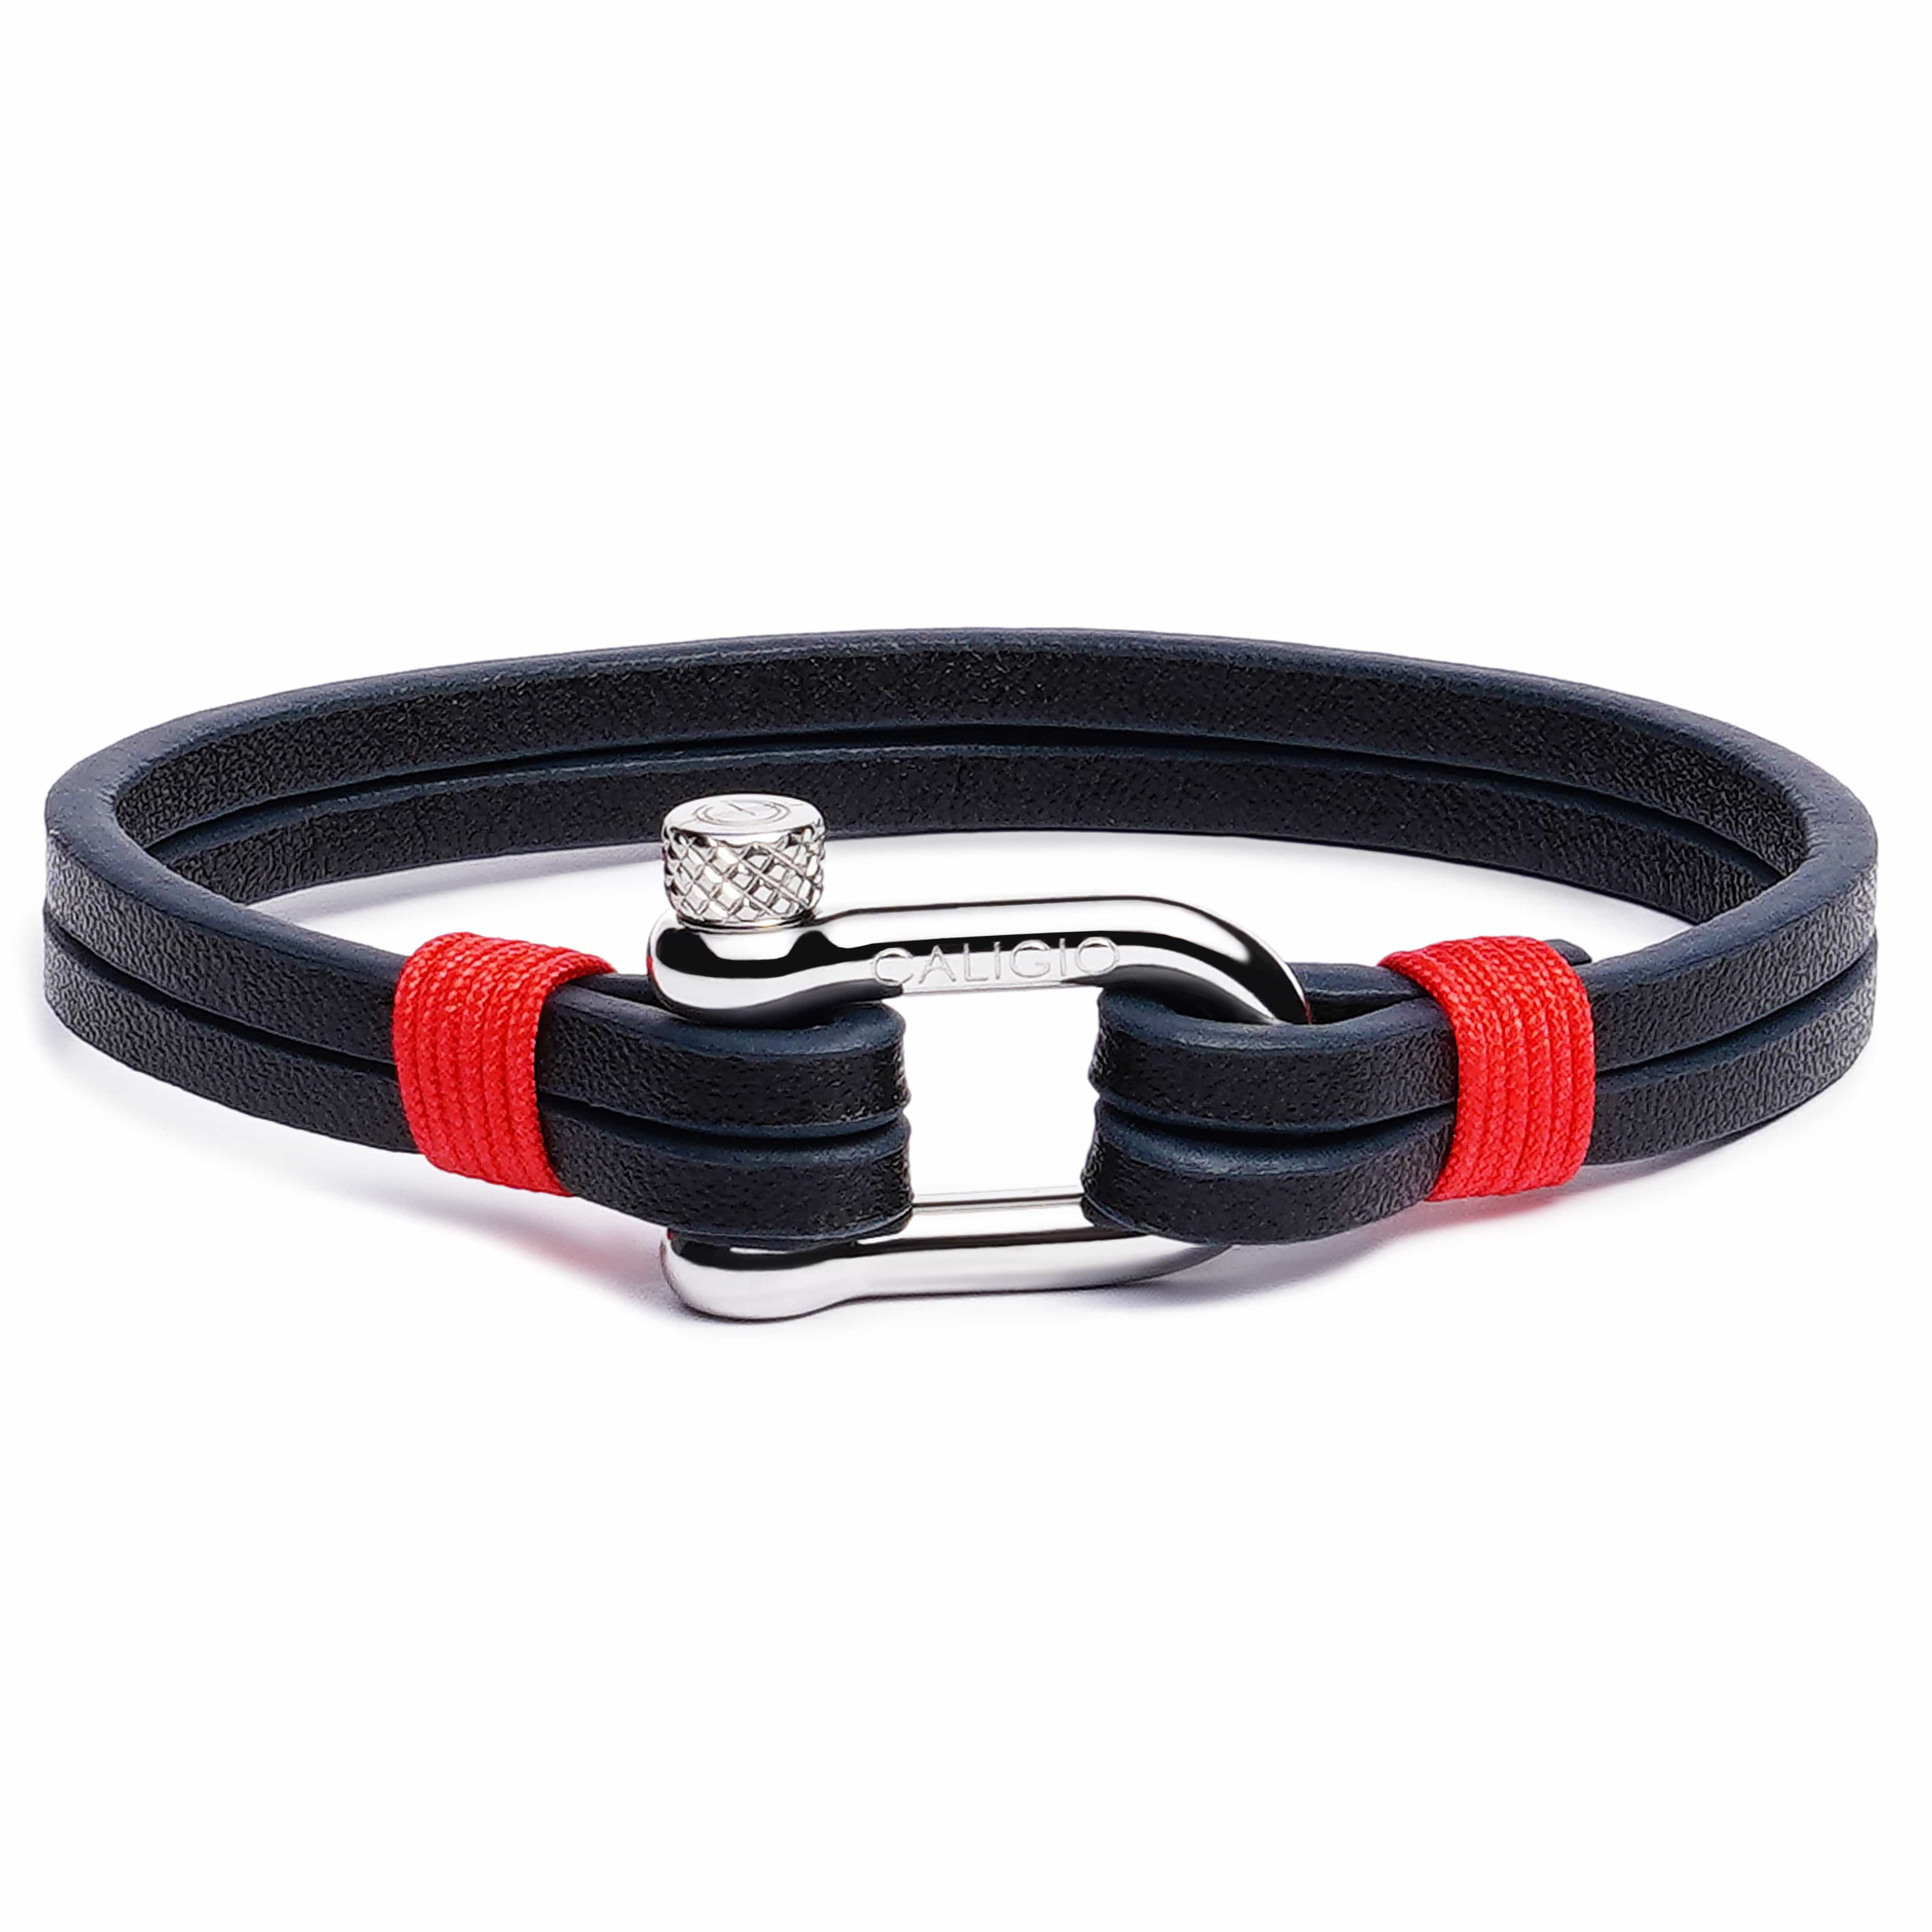 Black Leather Bracelet with Red Threads in XL soze, Egoist